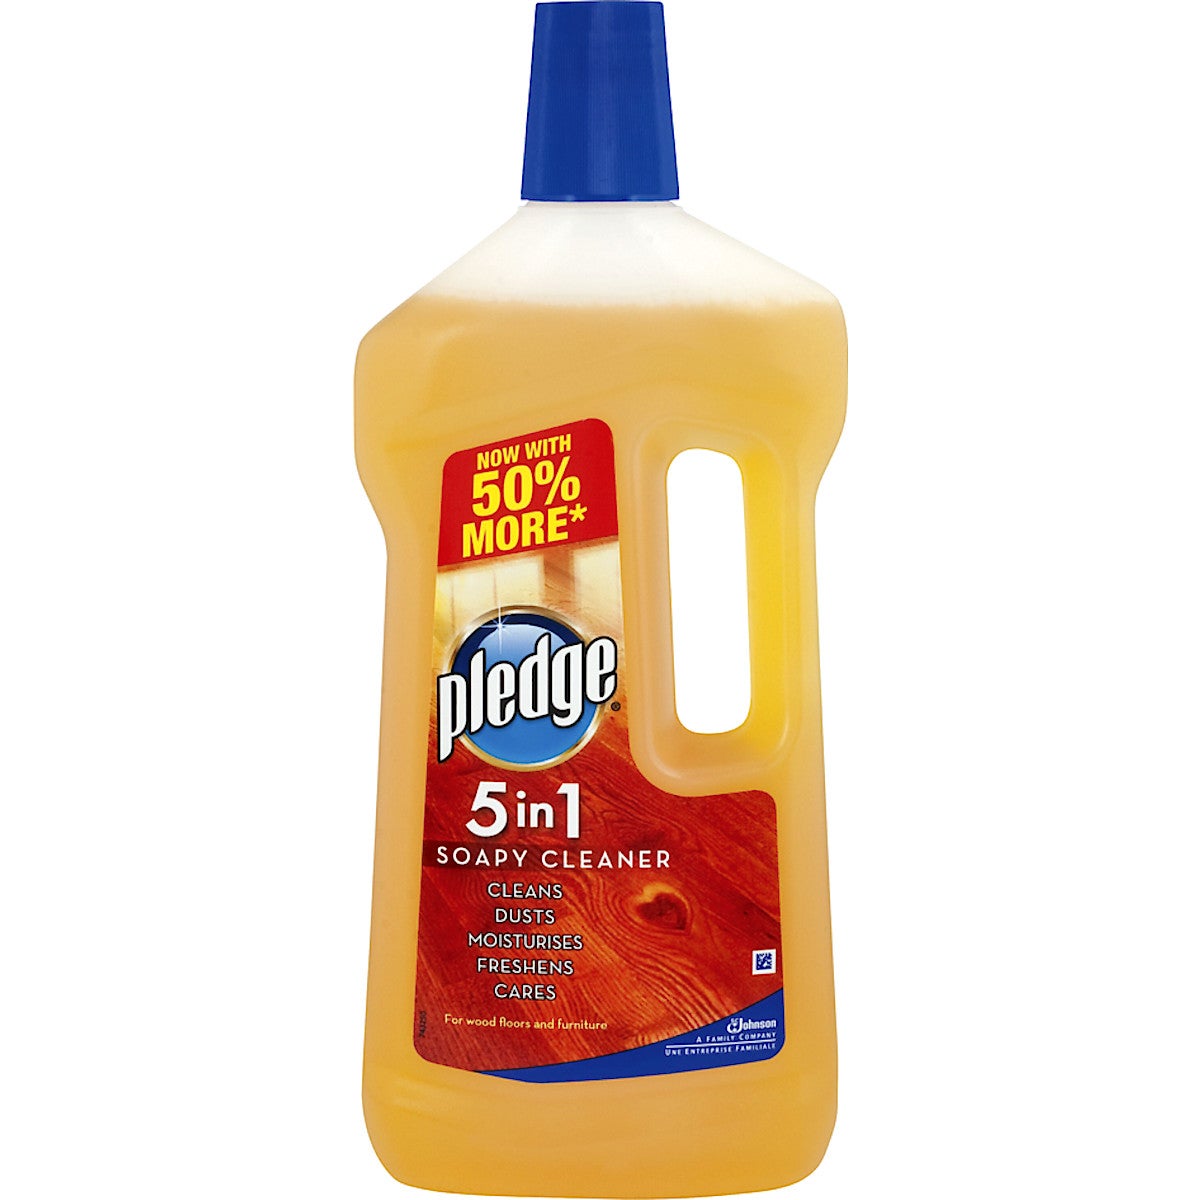 Pledge 5 In 1 Soapy Cleaner For Wood Clas Ohlson